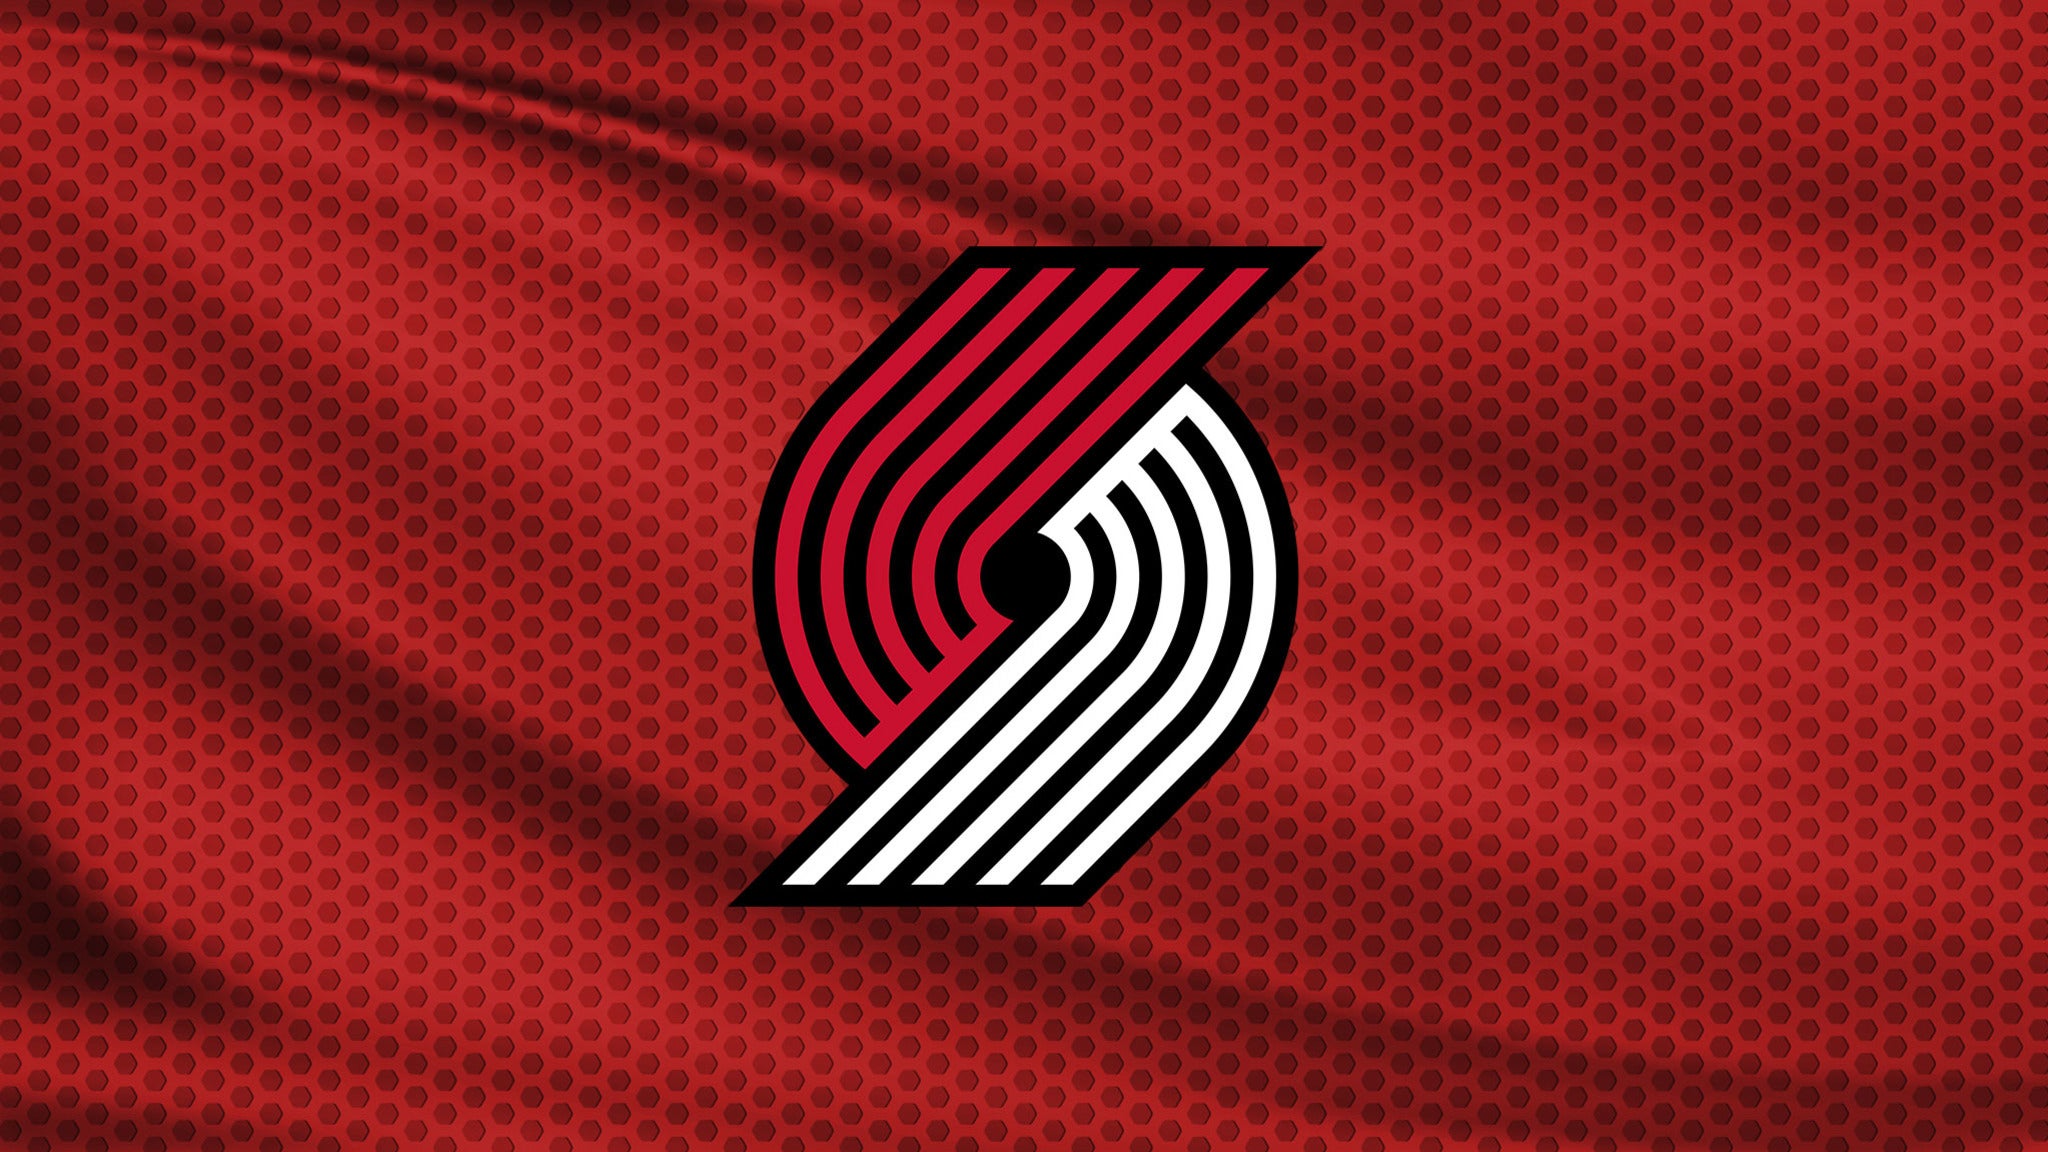 Portland Trail Blazers vs. Indiana Pacers in Portland promo photo for Exclusive presale offer code